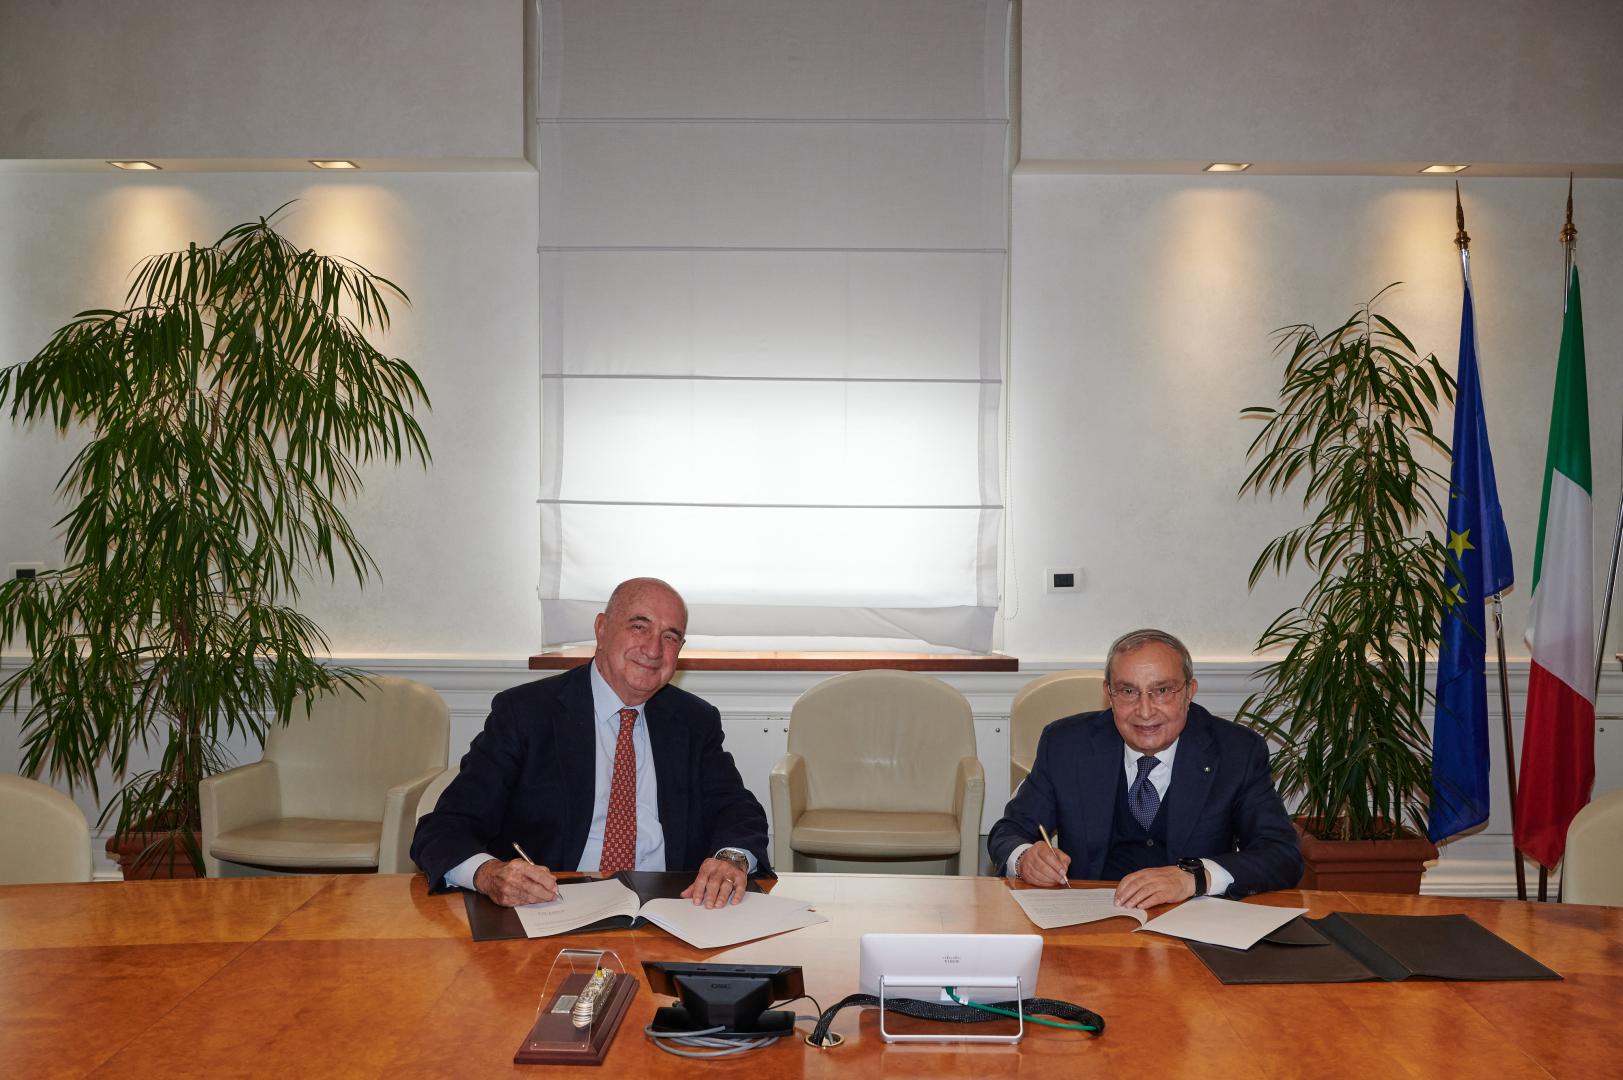 Fincantieri and Almaviva together for safe and sustainable mobility 